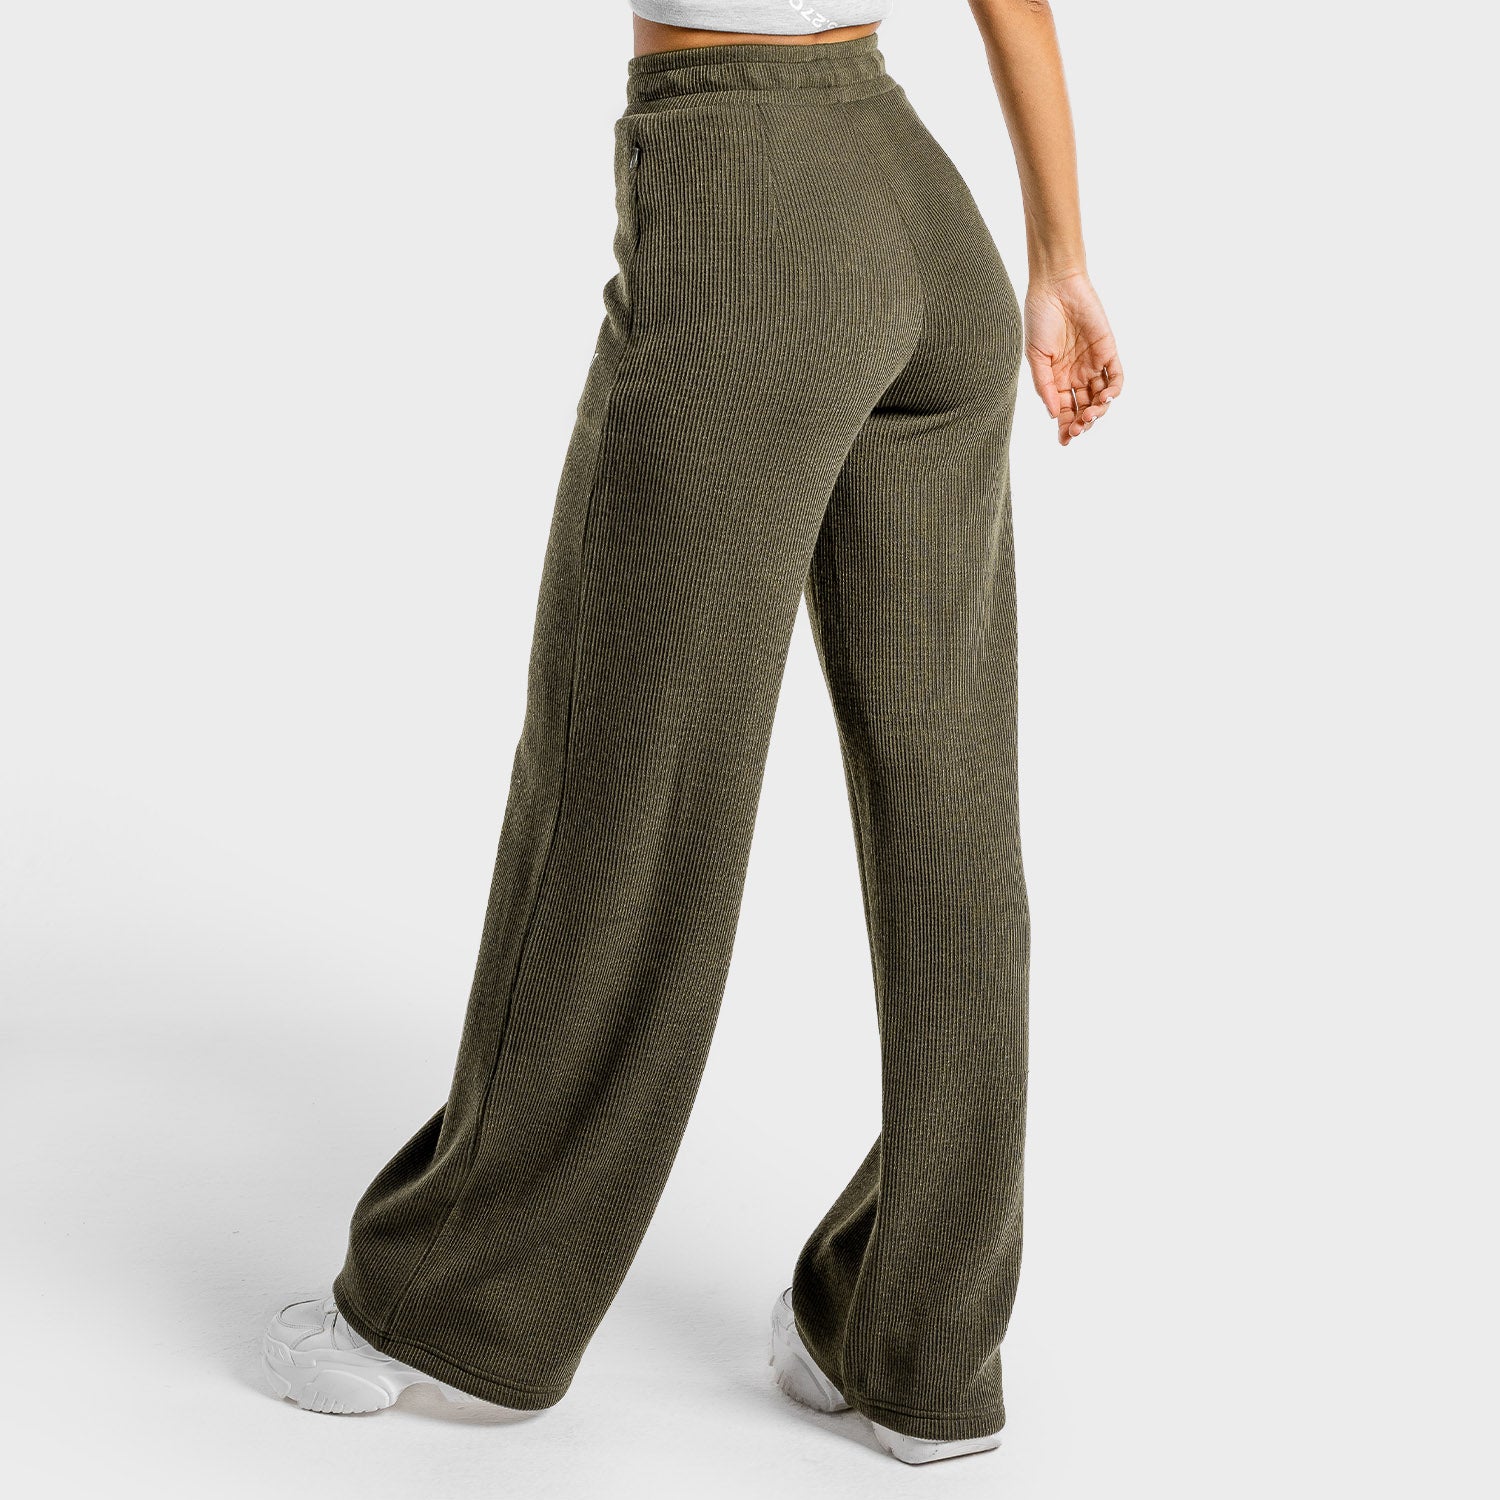 squatwolf-gym-pants-for-women-luxe-wide-leg-pants-olive-workout-clothes